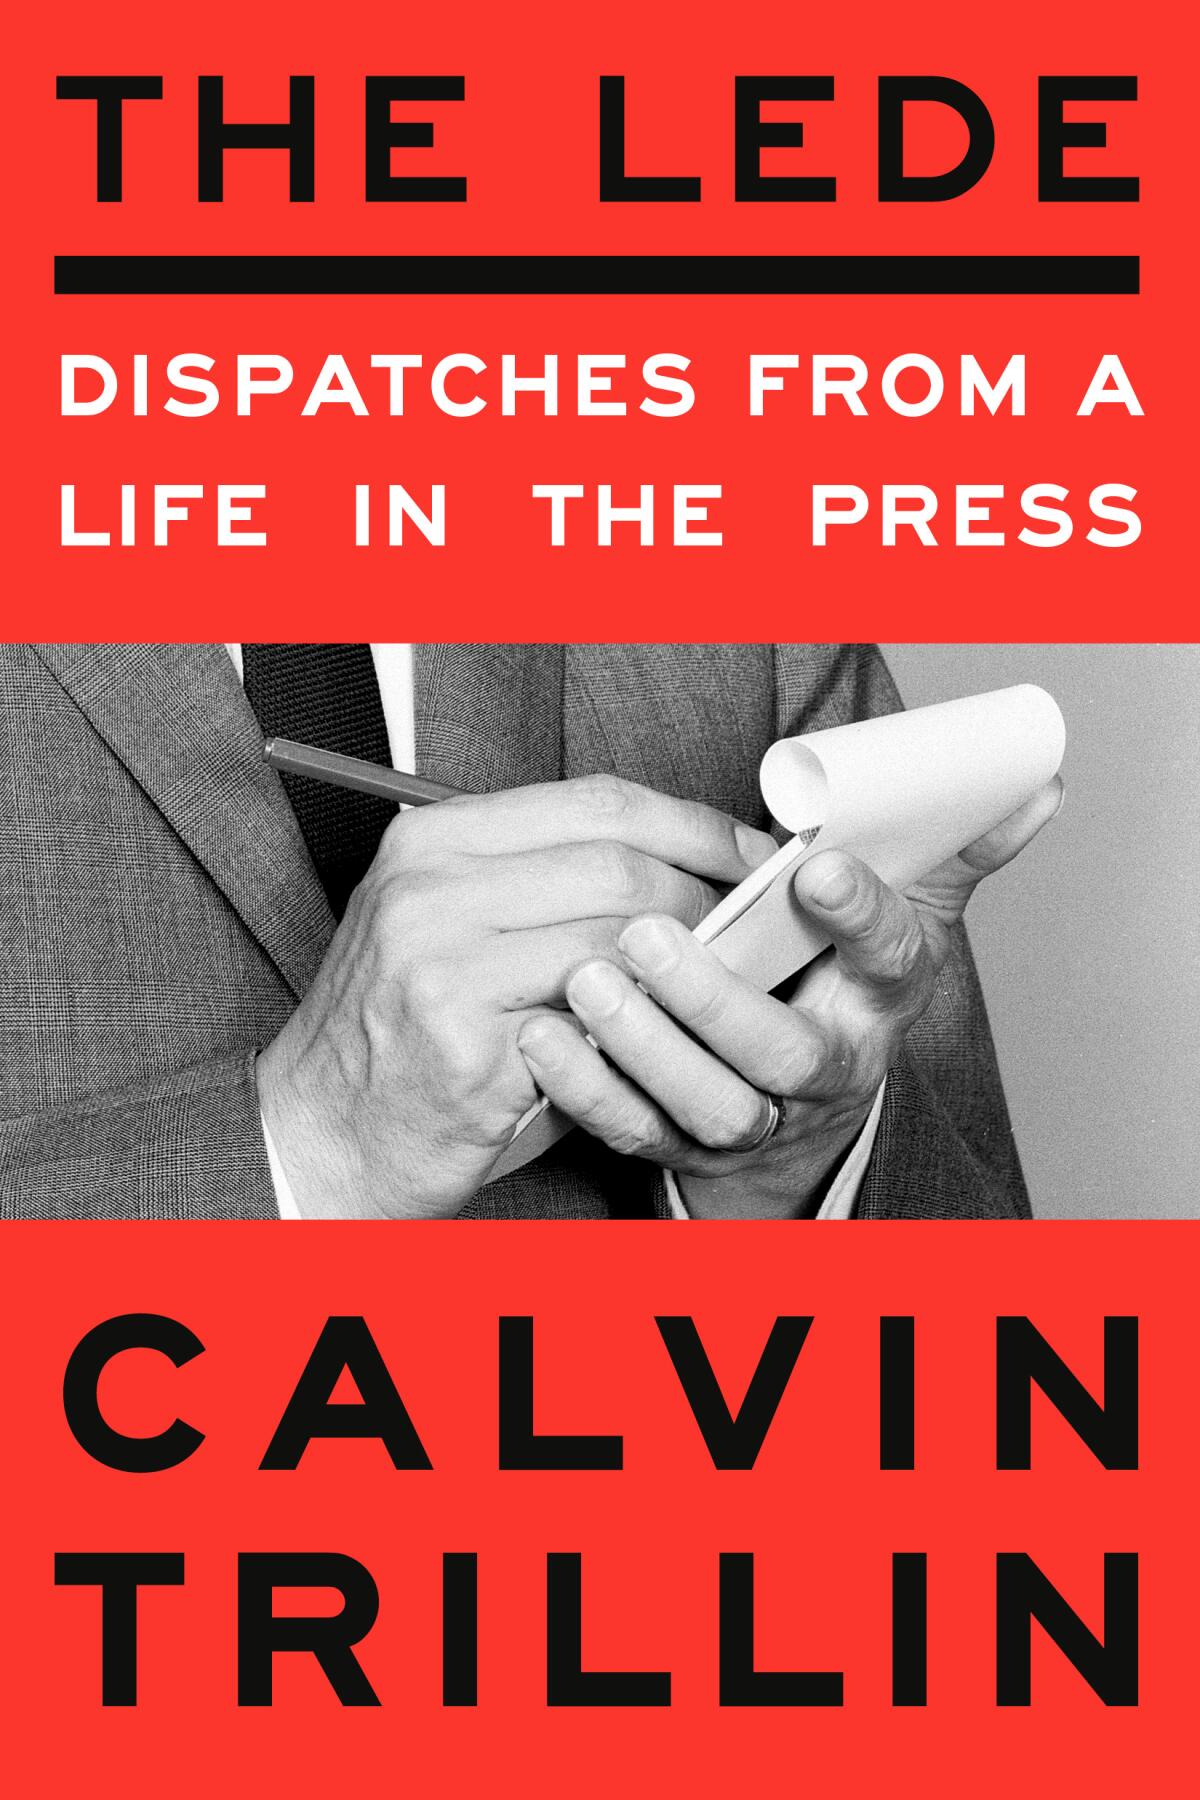 "The Lede: Dispatches From a Life in the Press" by Calvin Trillin